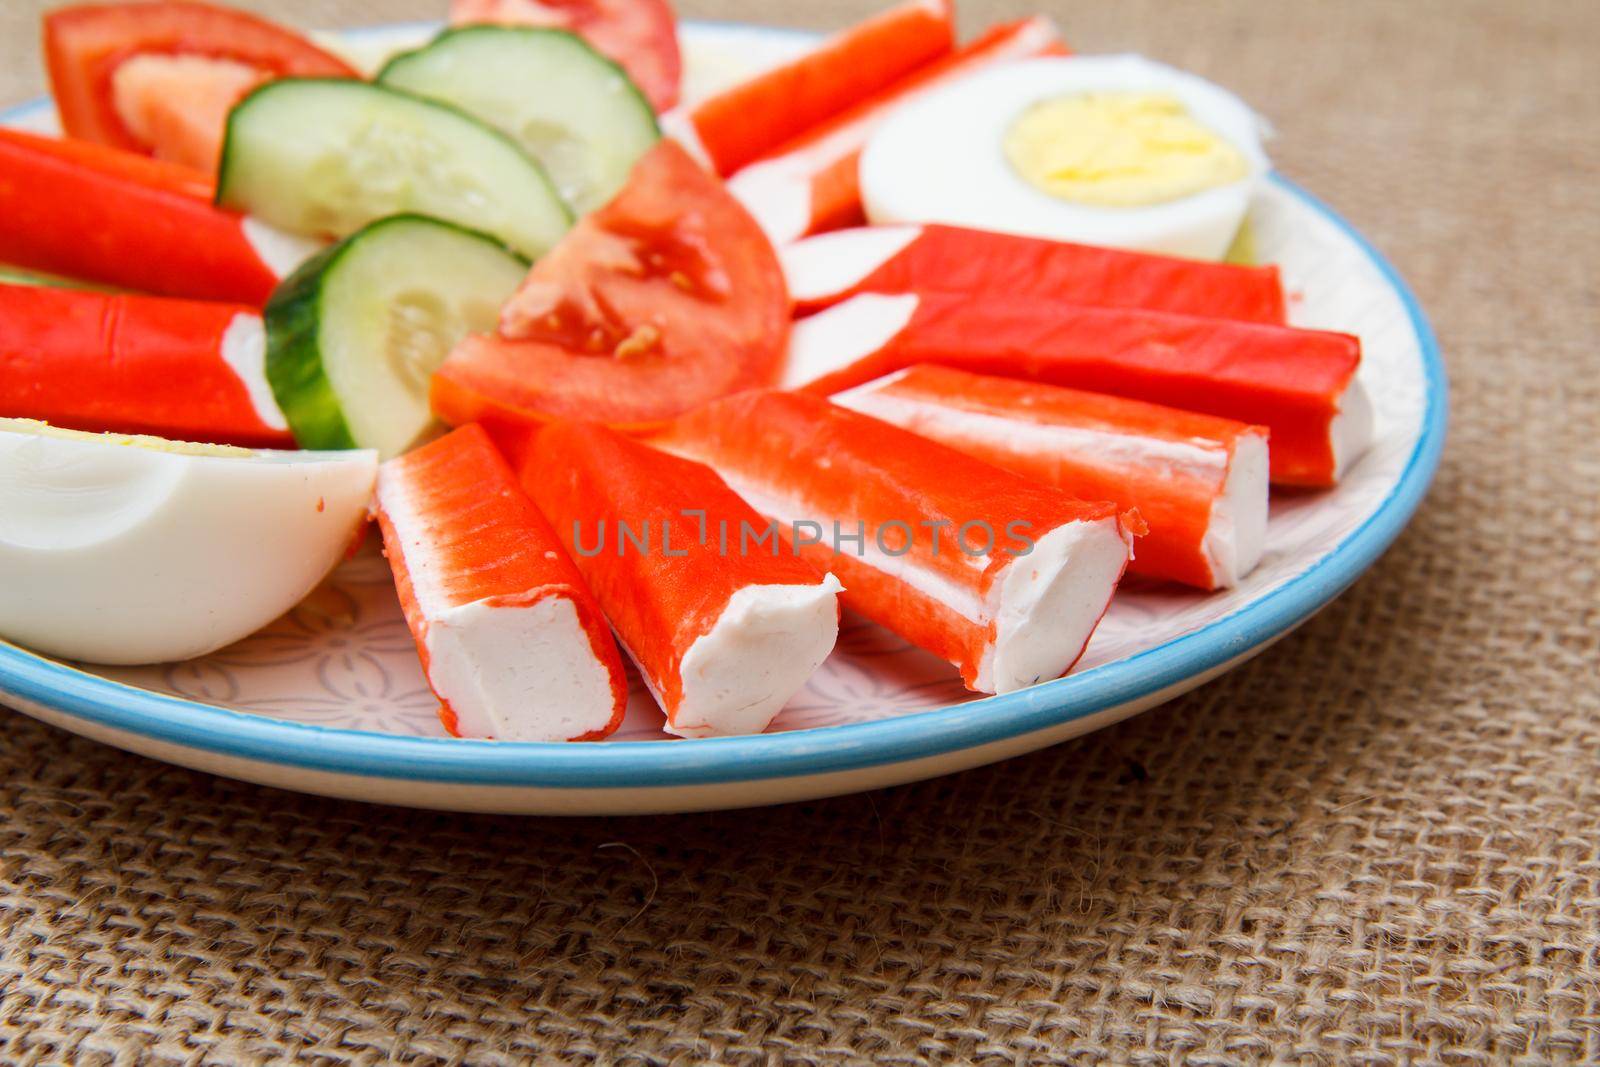 Plate with crab sticks, boiled egg and freshly sliced tomato and cucumber on sackcloth